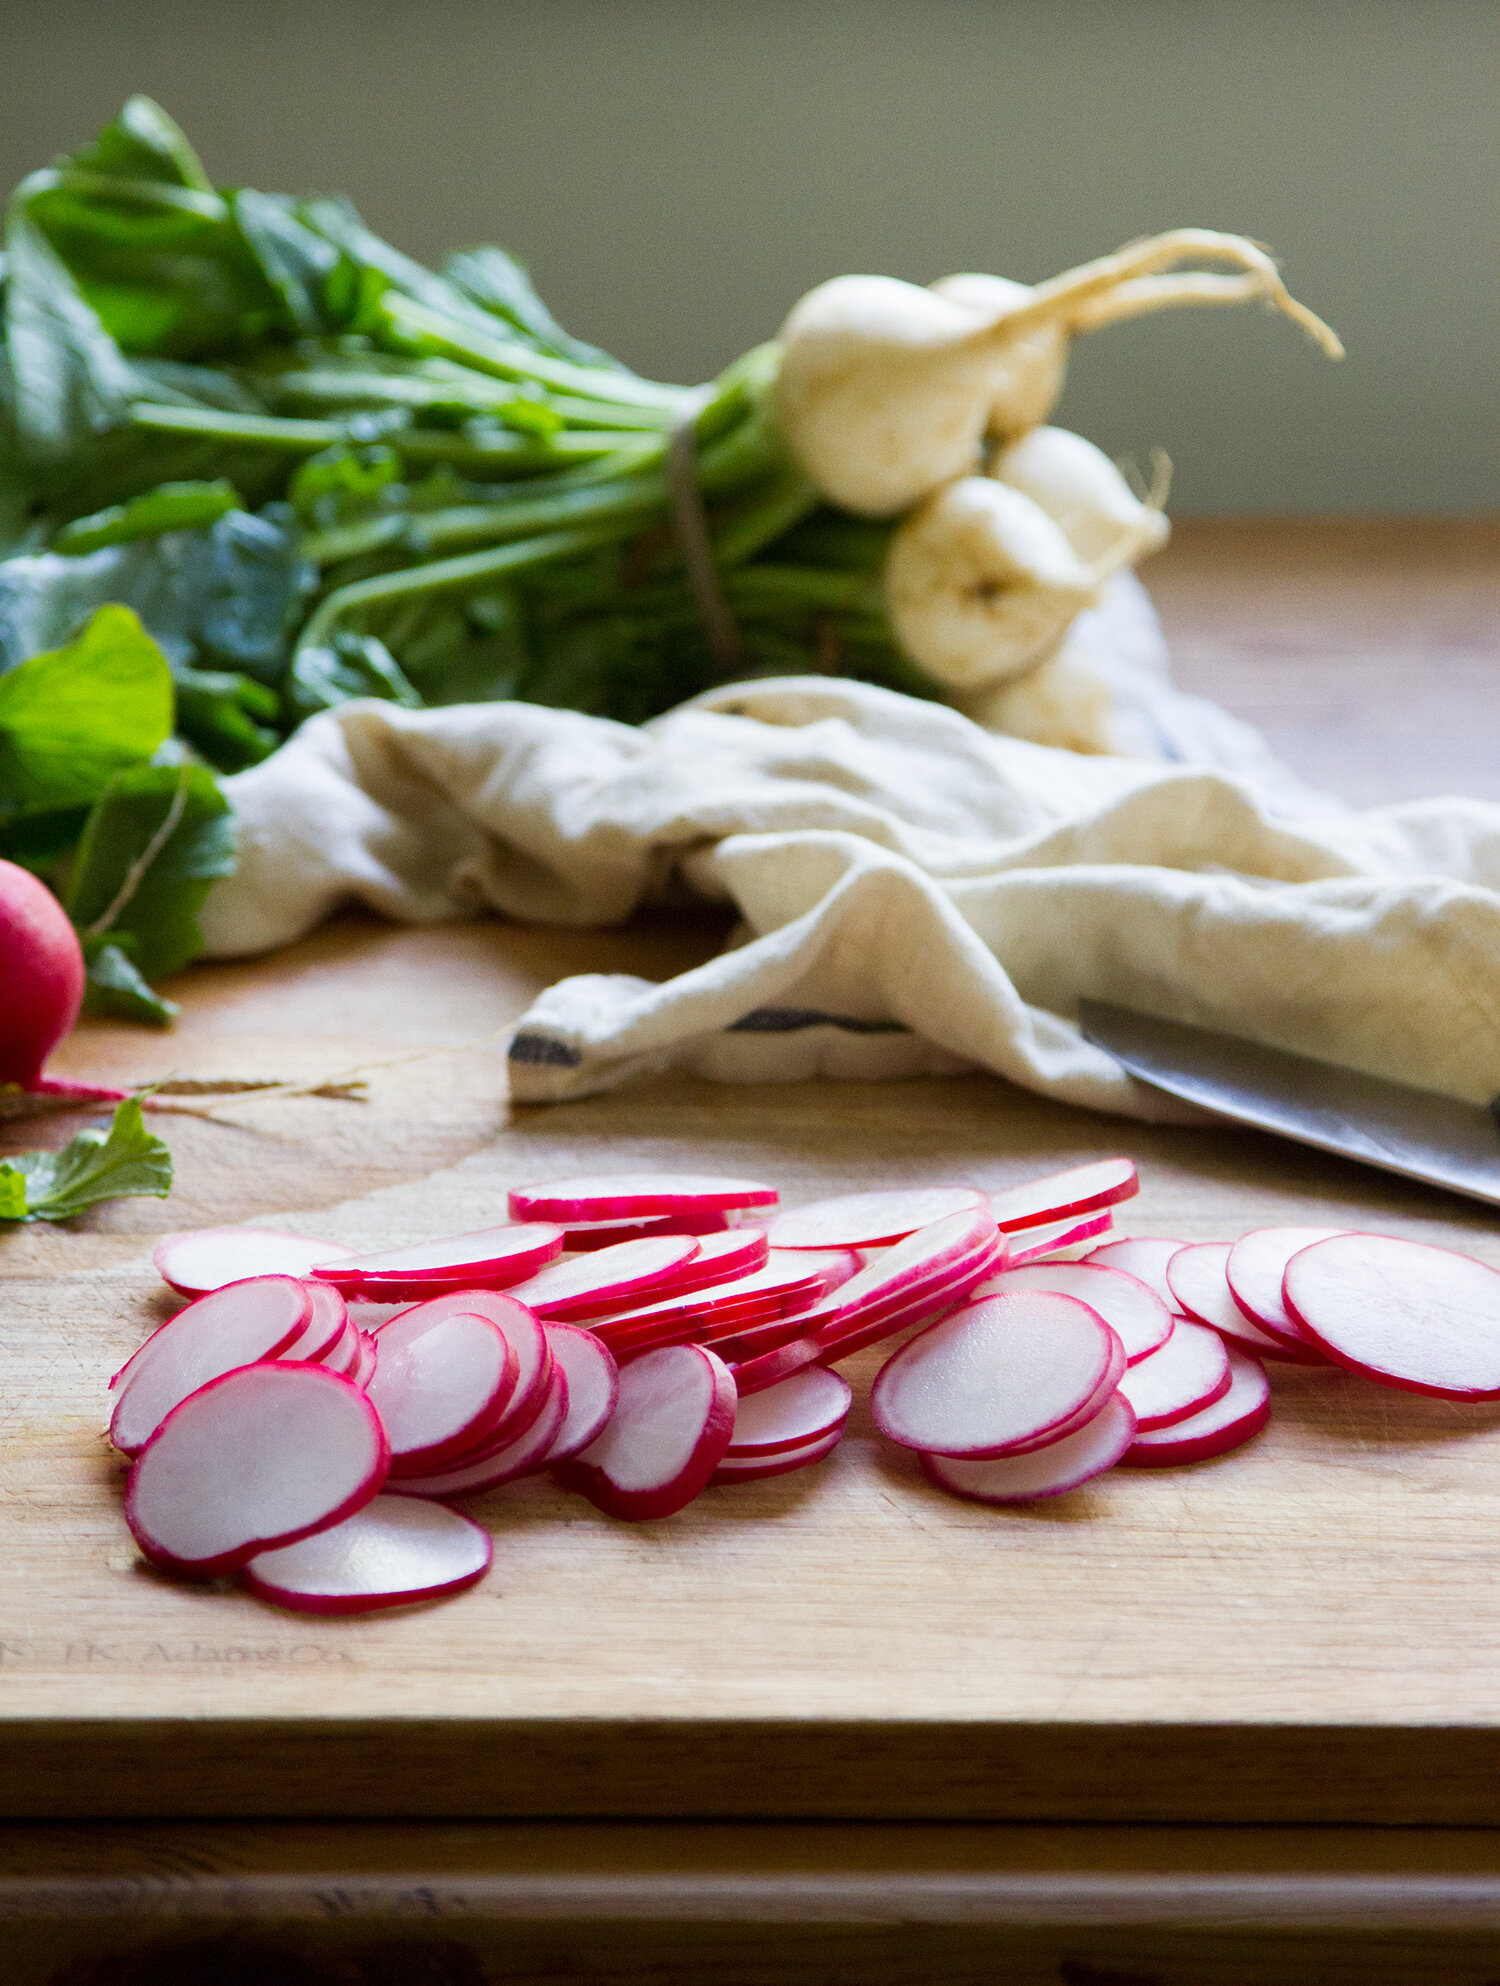 make your own pickled radishes | reading my tea leaves